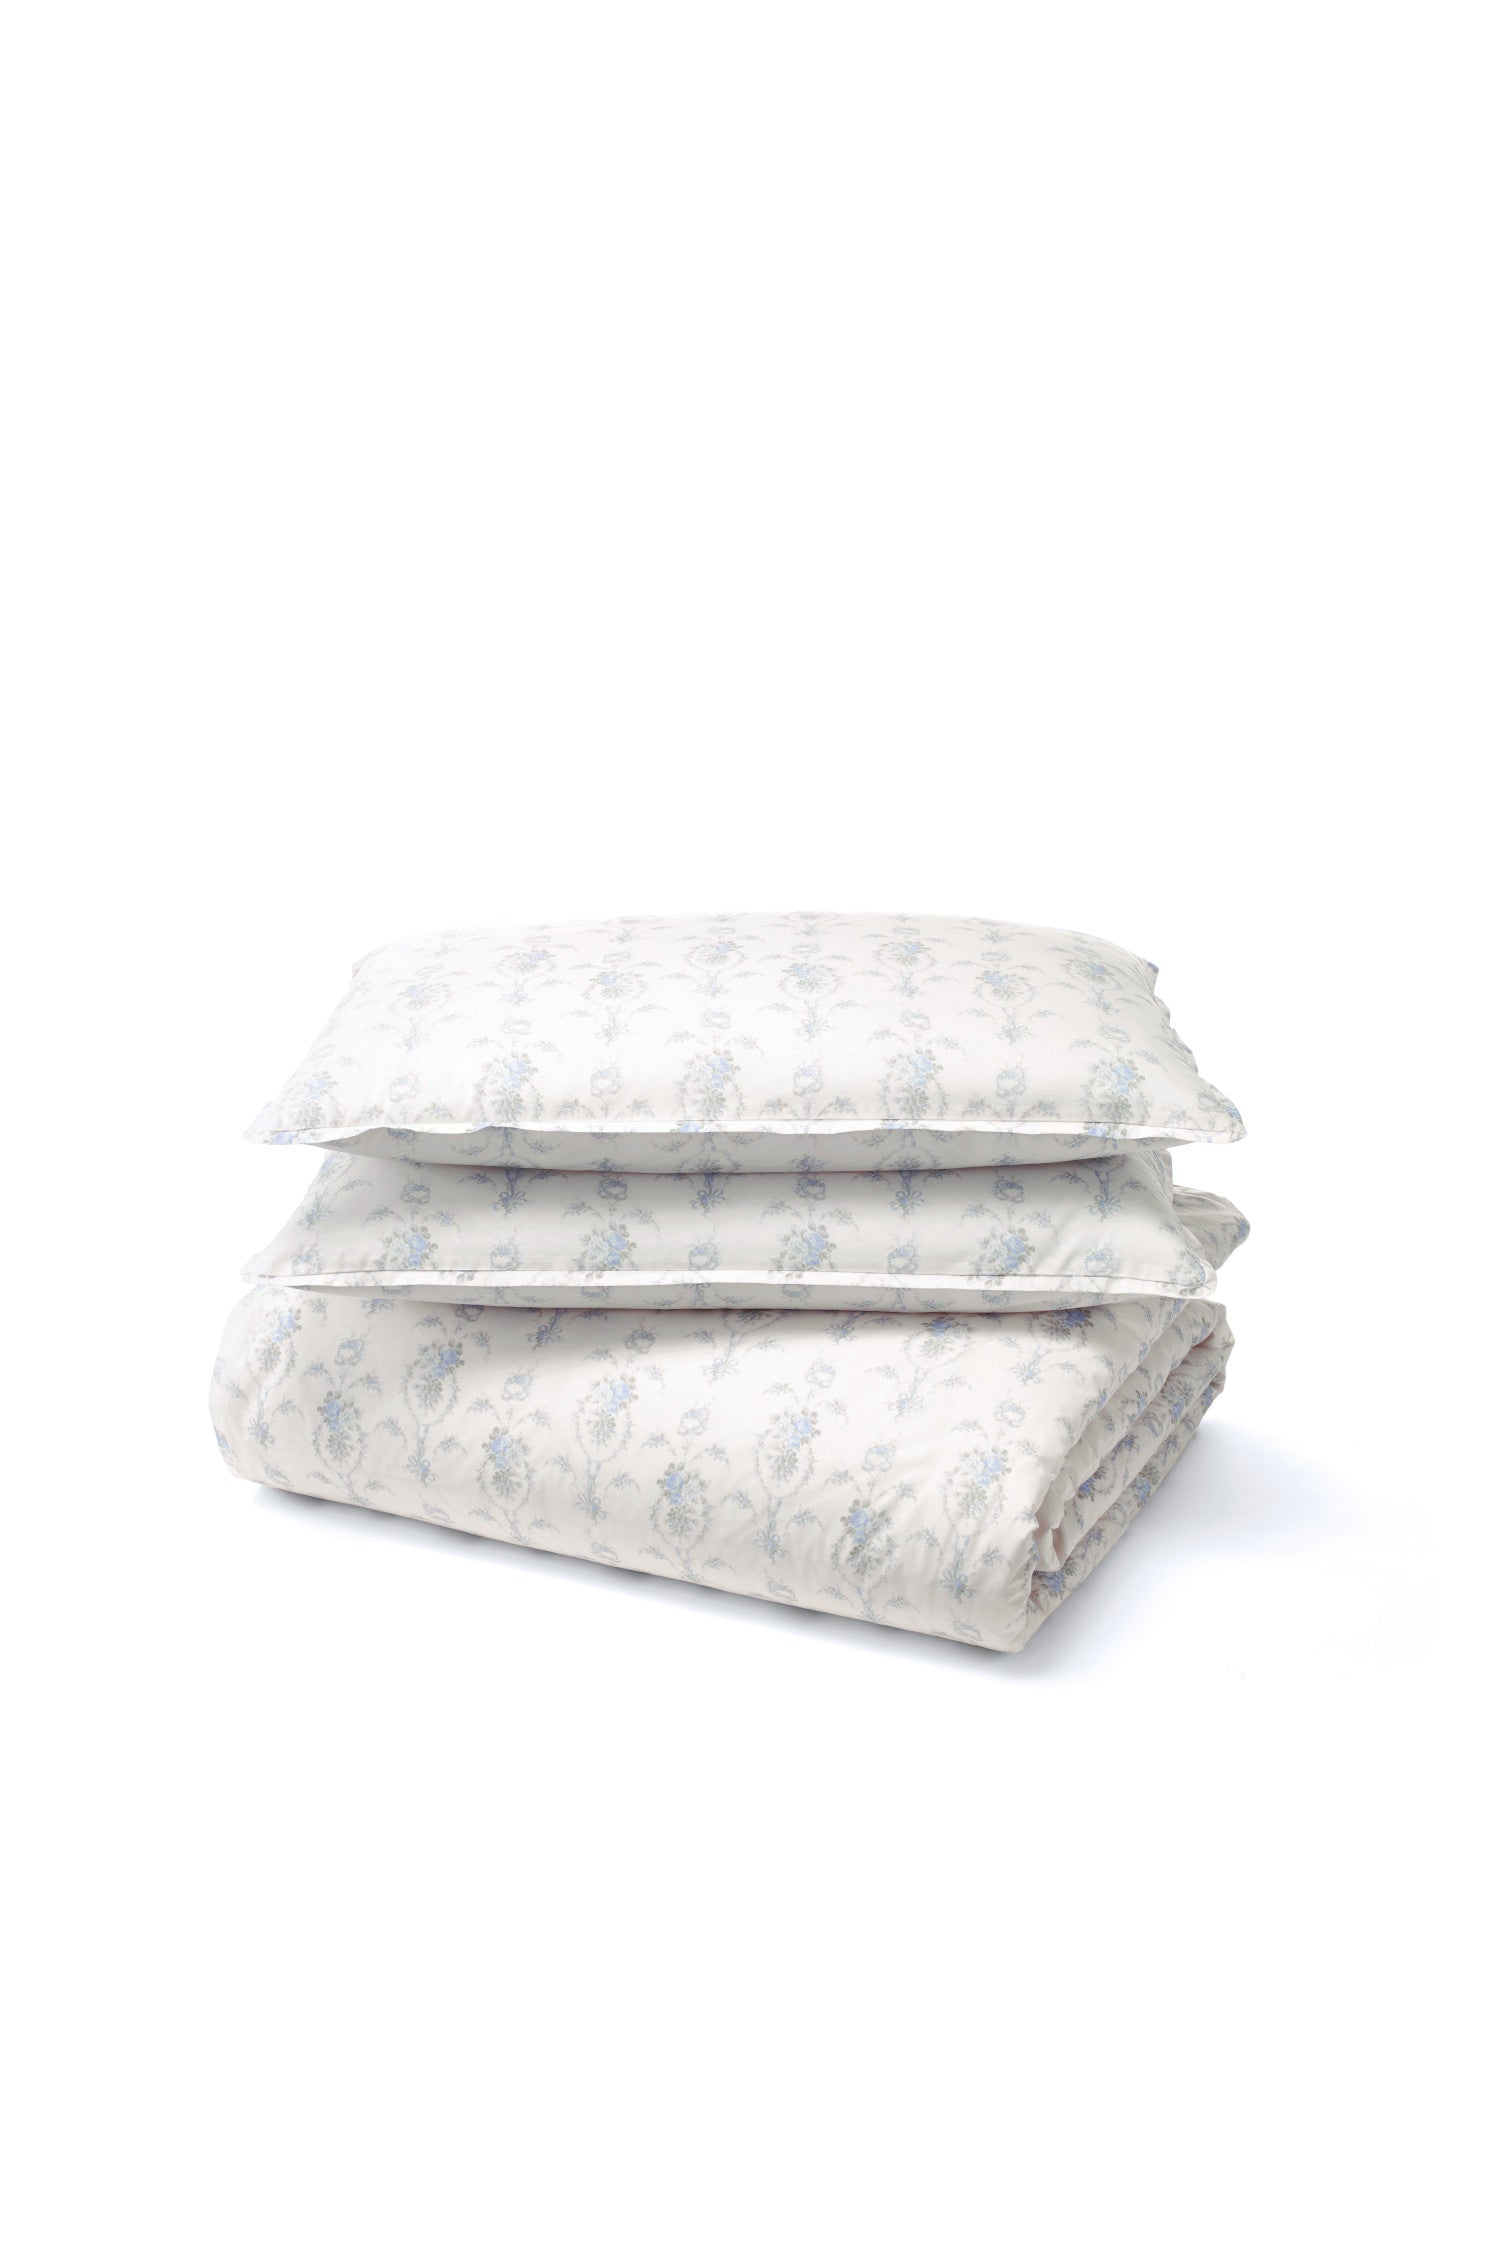 Delicate blue floral pattern against a pristine white Pillow. Crafted from 100% cotton